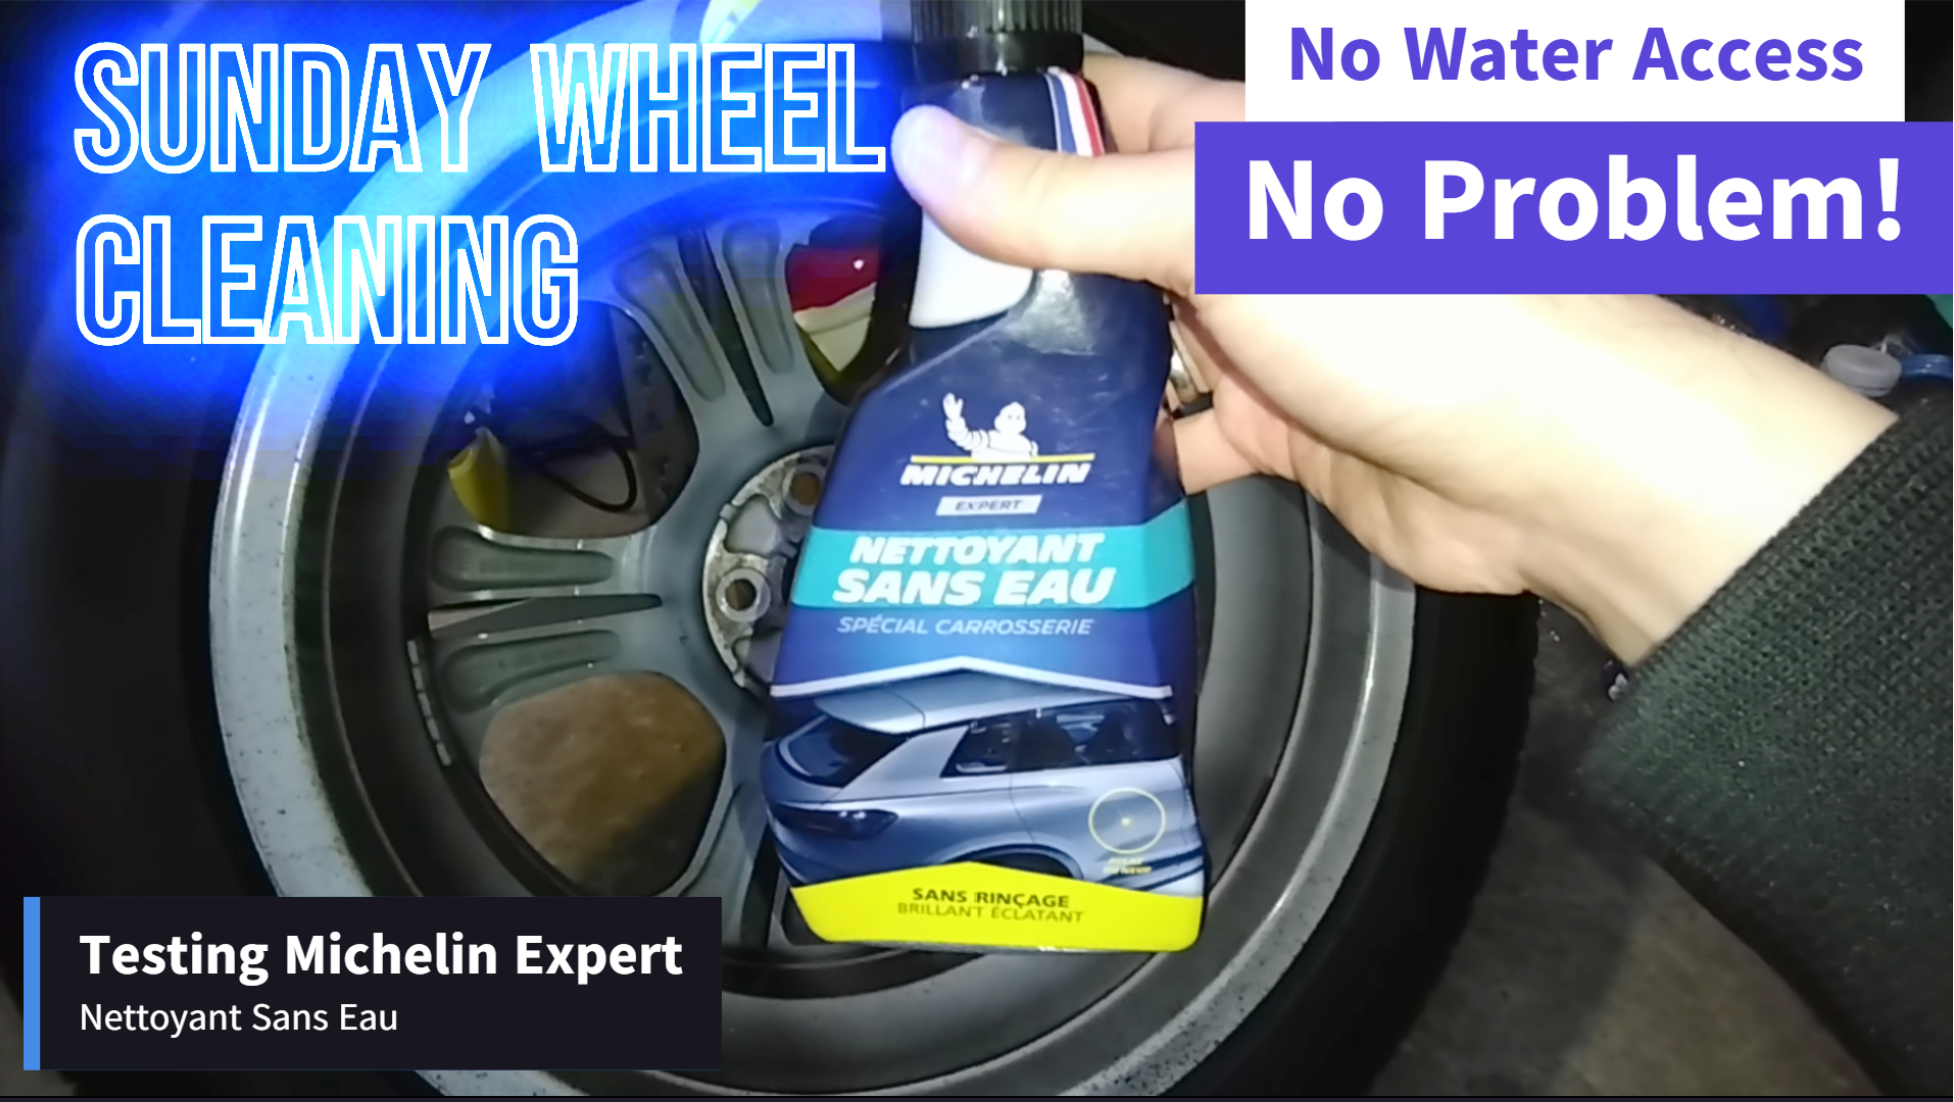 How to clean wheels without water using Michelin Expert Sans Eau